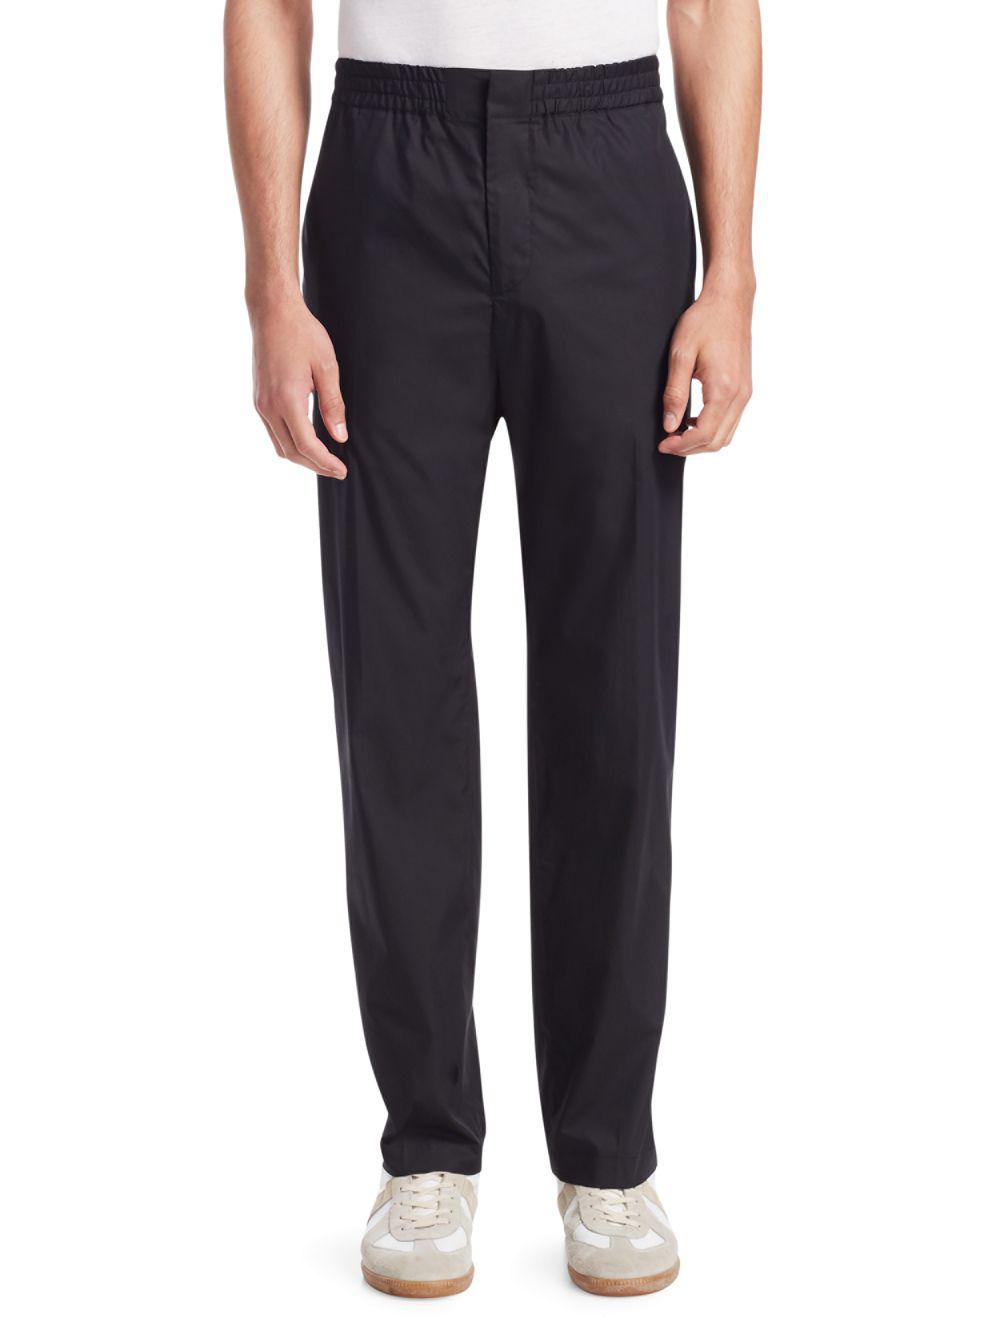 MSGM Cotton Elastic Waist Trousers in Black for Men - Lyst